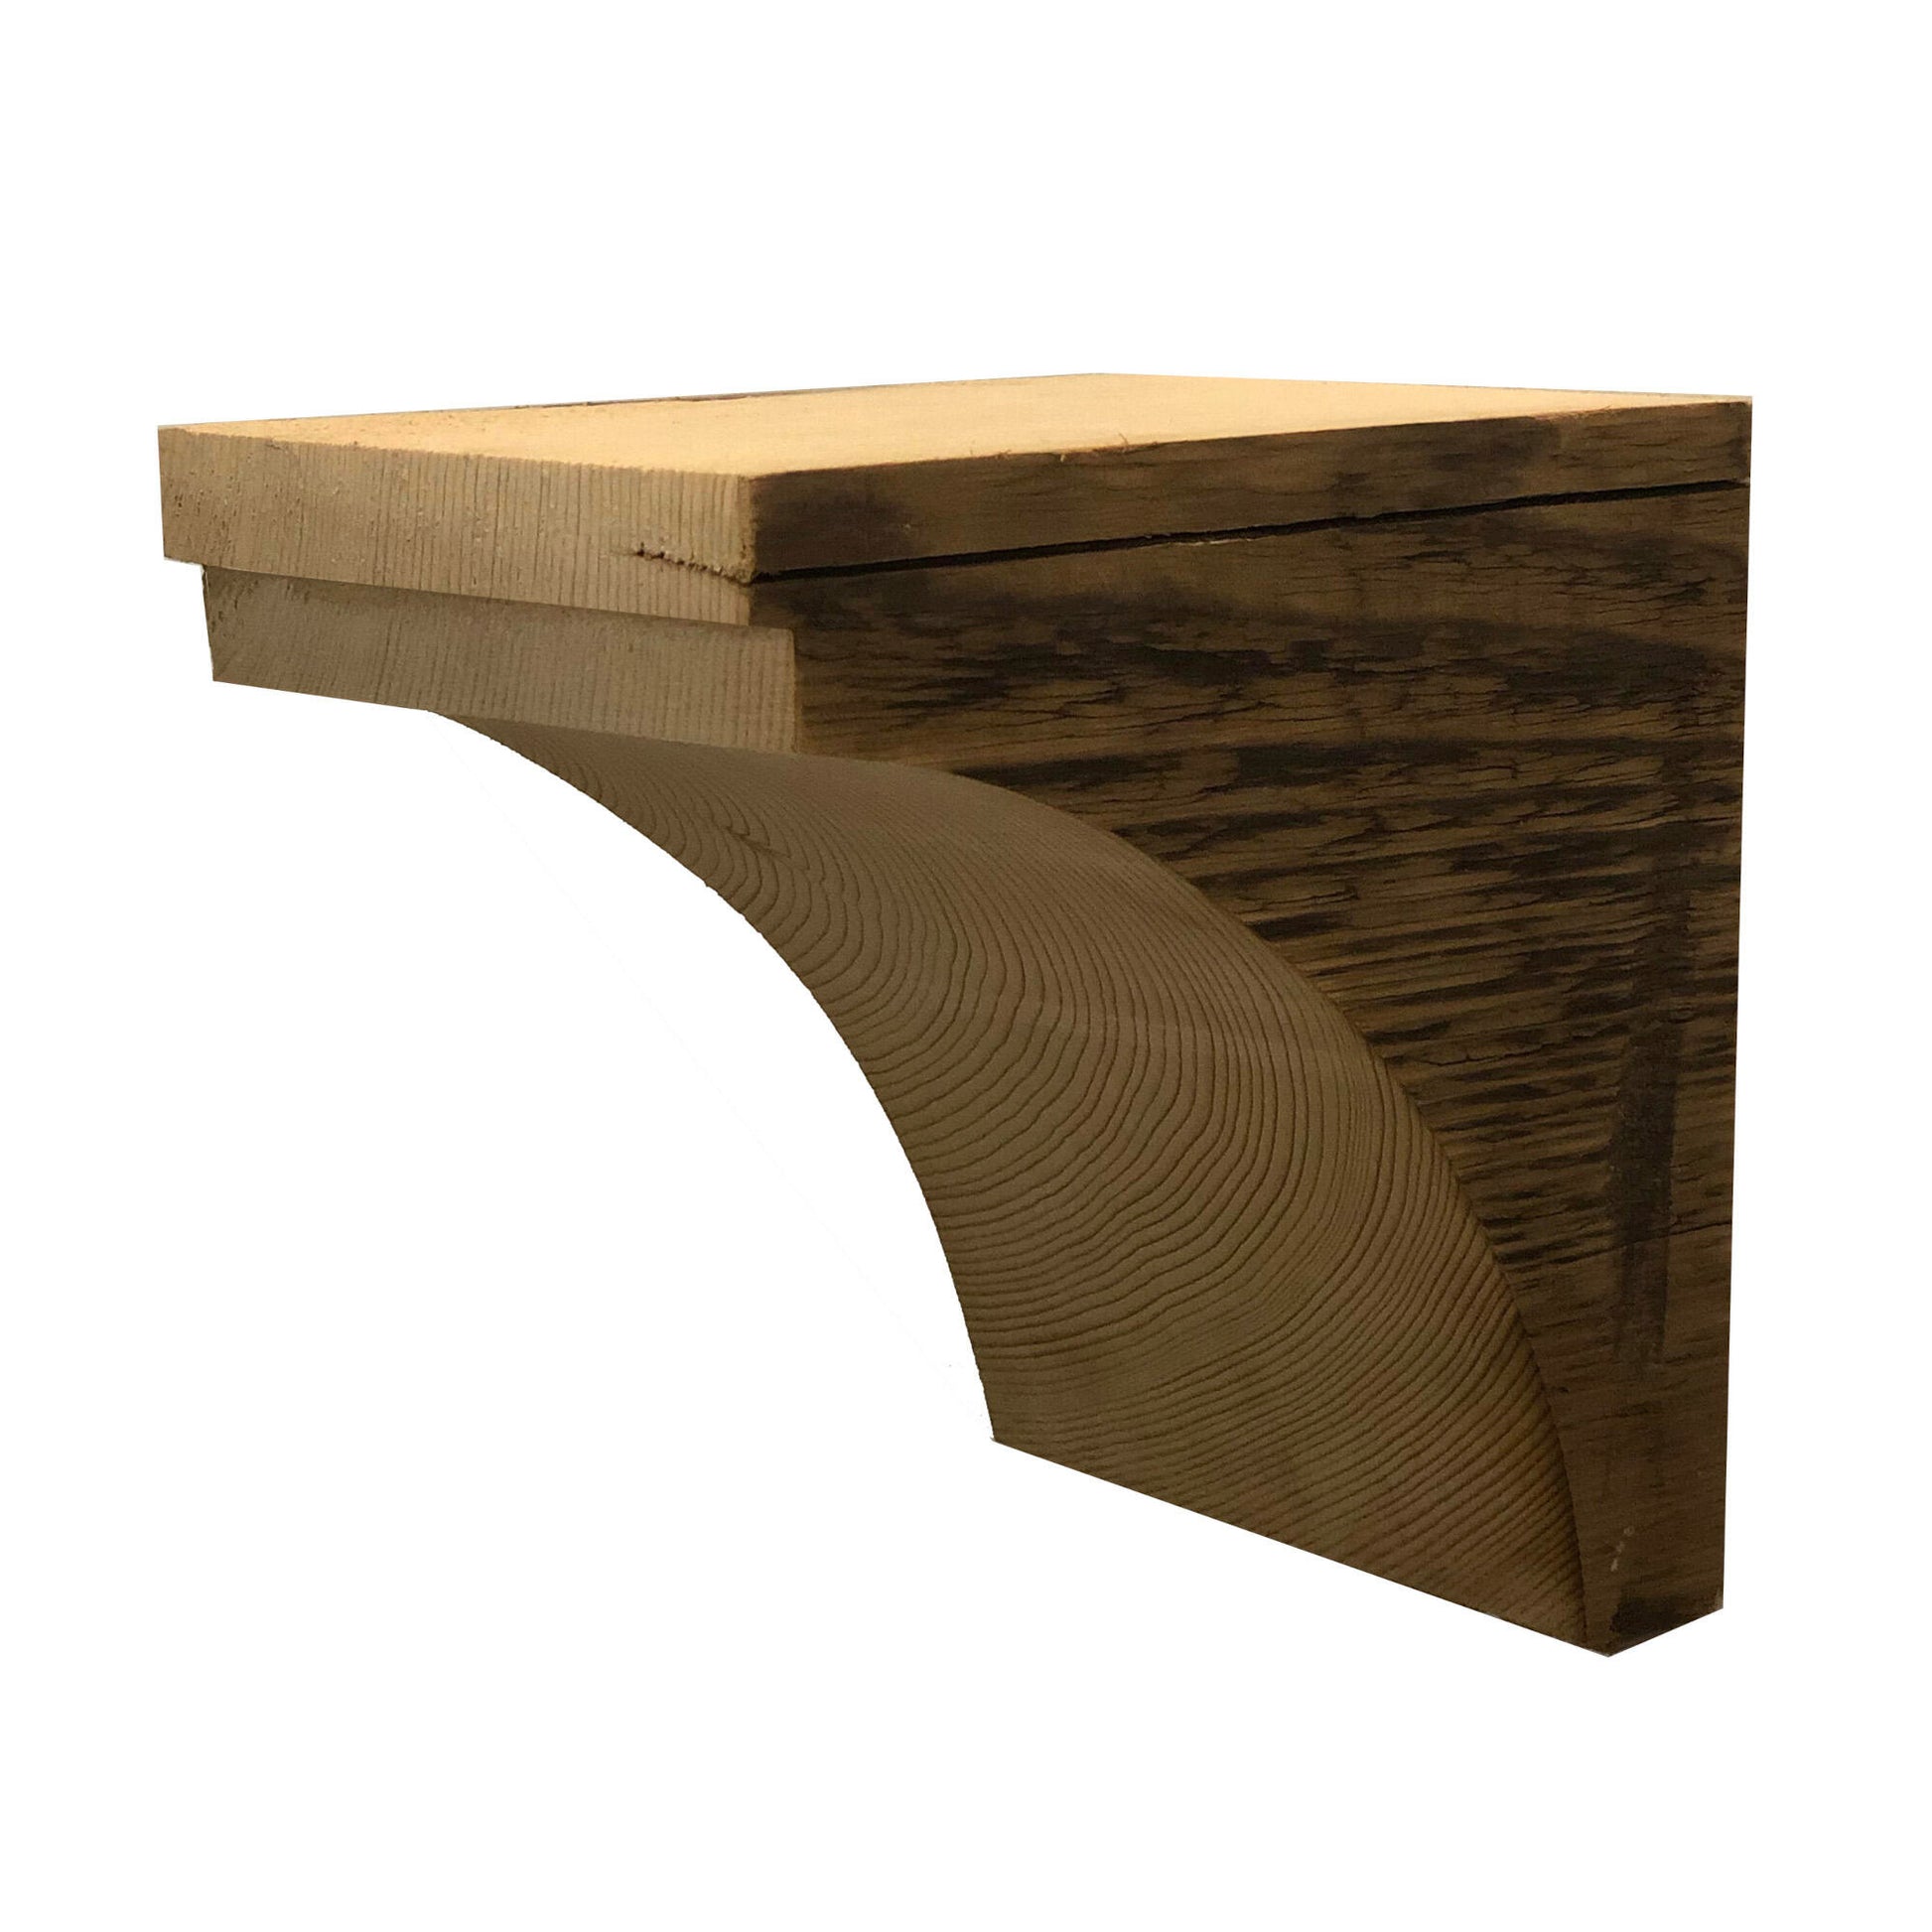 decorative corbel made from reclaimed barnwood. Wood grain displayed on the side and corbel shown in a decorative profile. There is one small step at the top of the corbel before the arch.